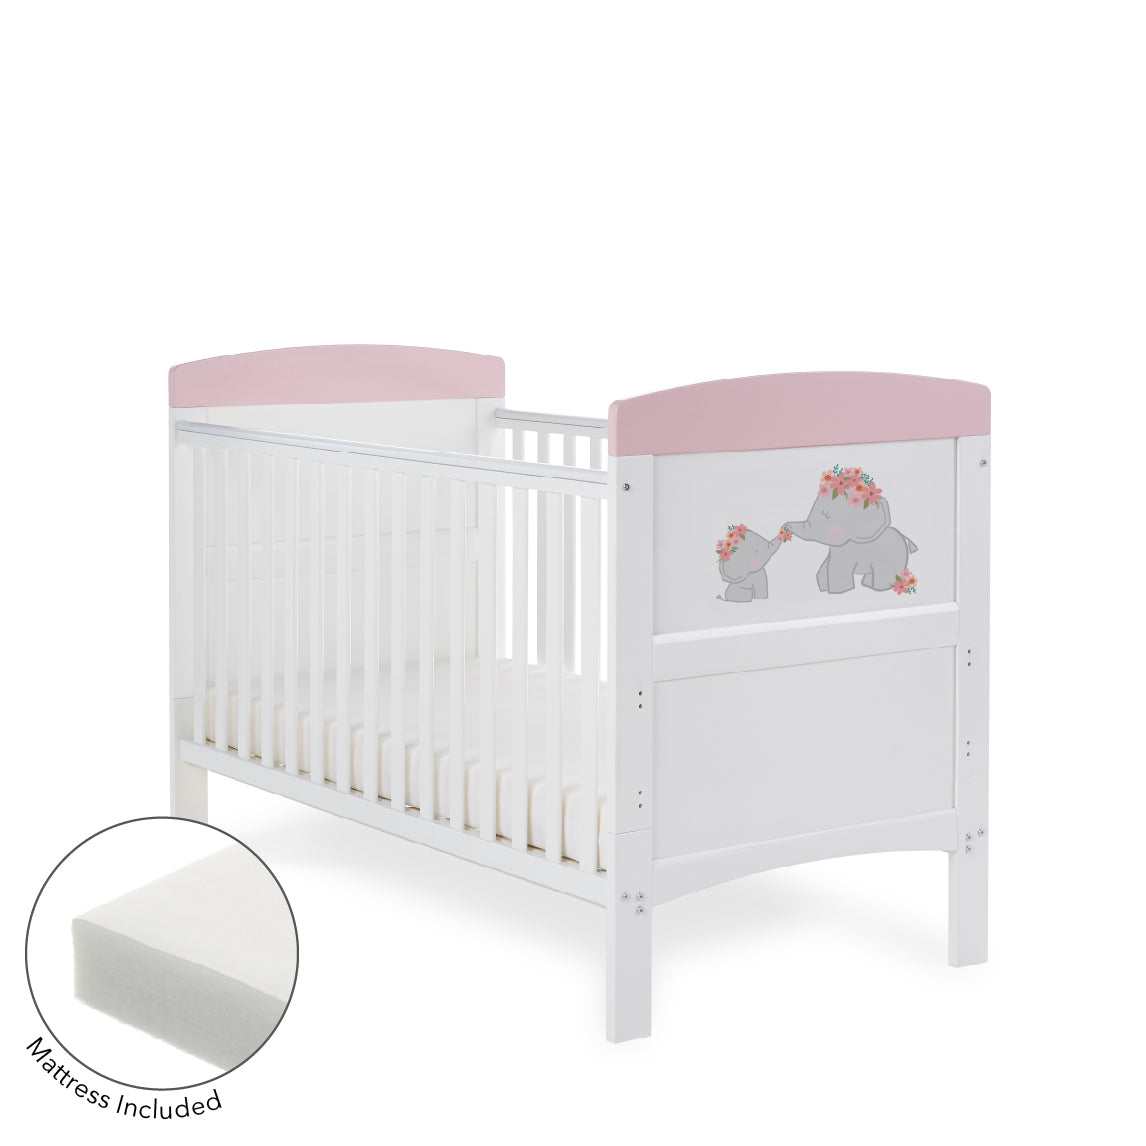 Obaby Grace Inspire Cot Bed & Fibre Mattress – Me & Mini Me Elephants – Pink -  | For Your Little One